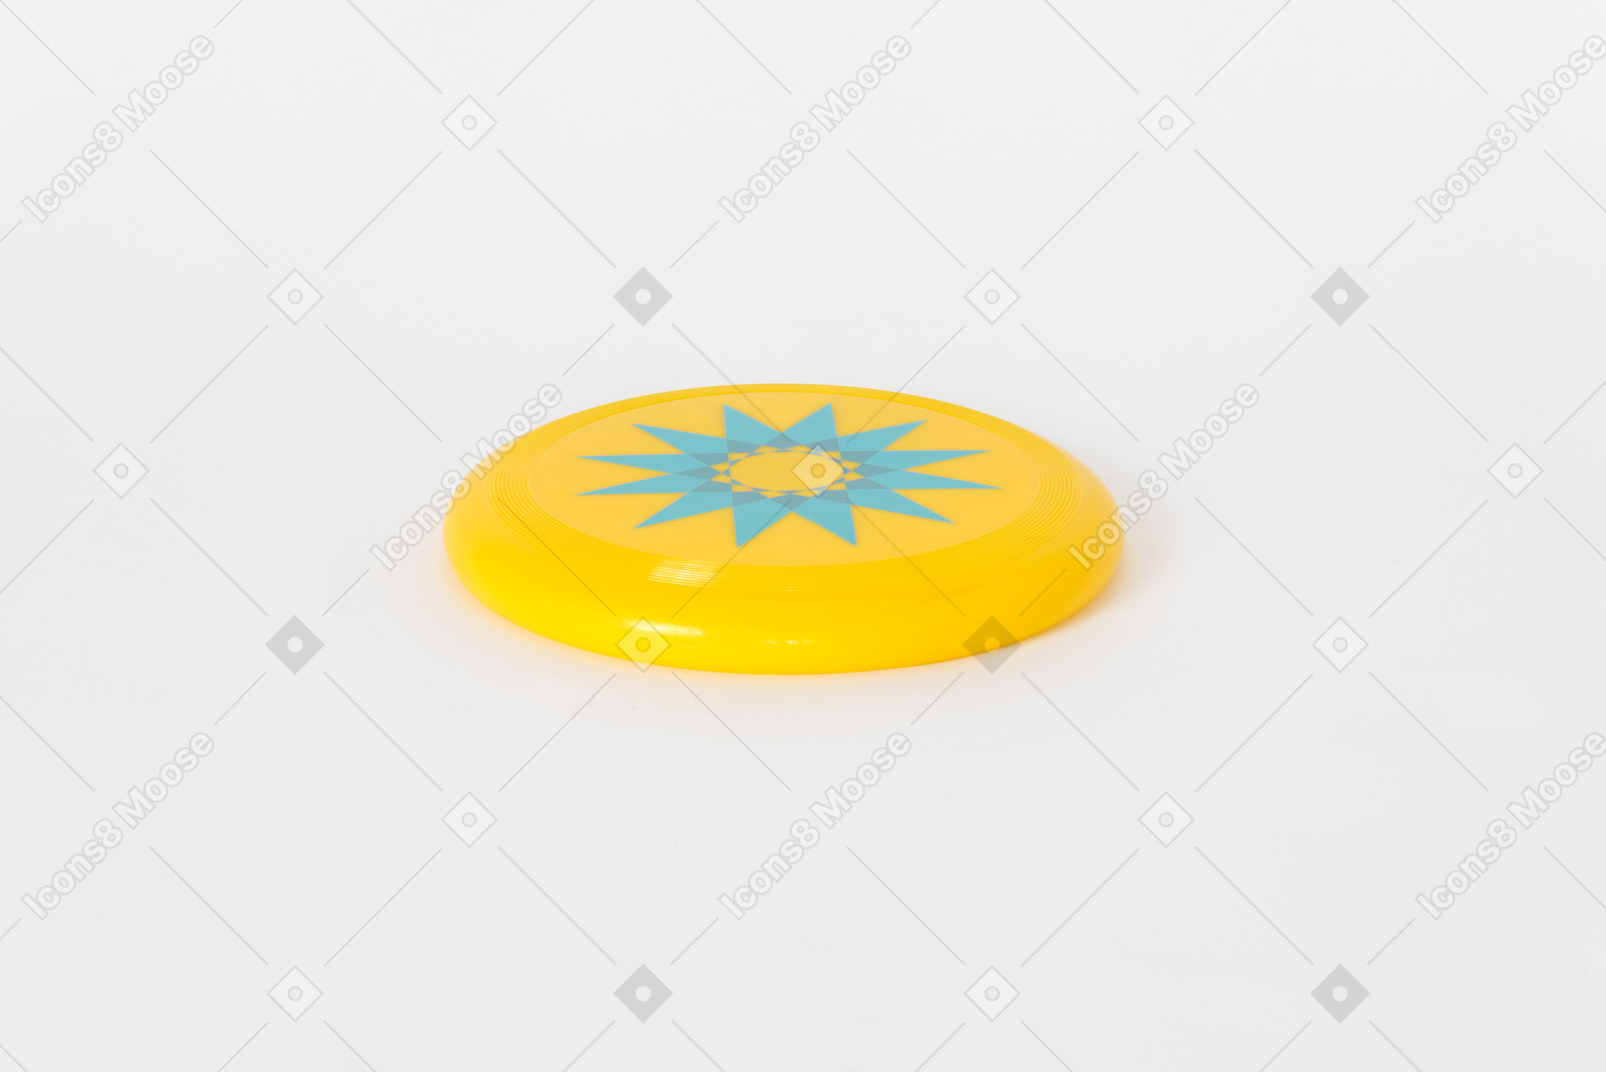 Blue and yellow frisbee on a white background